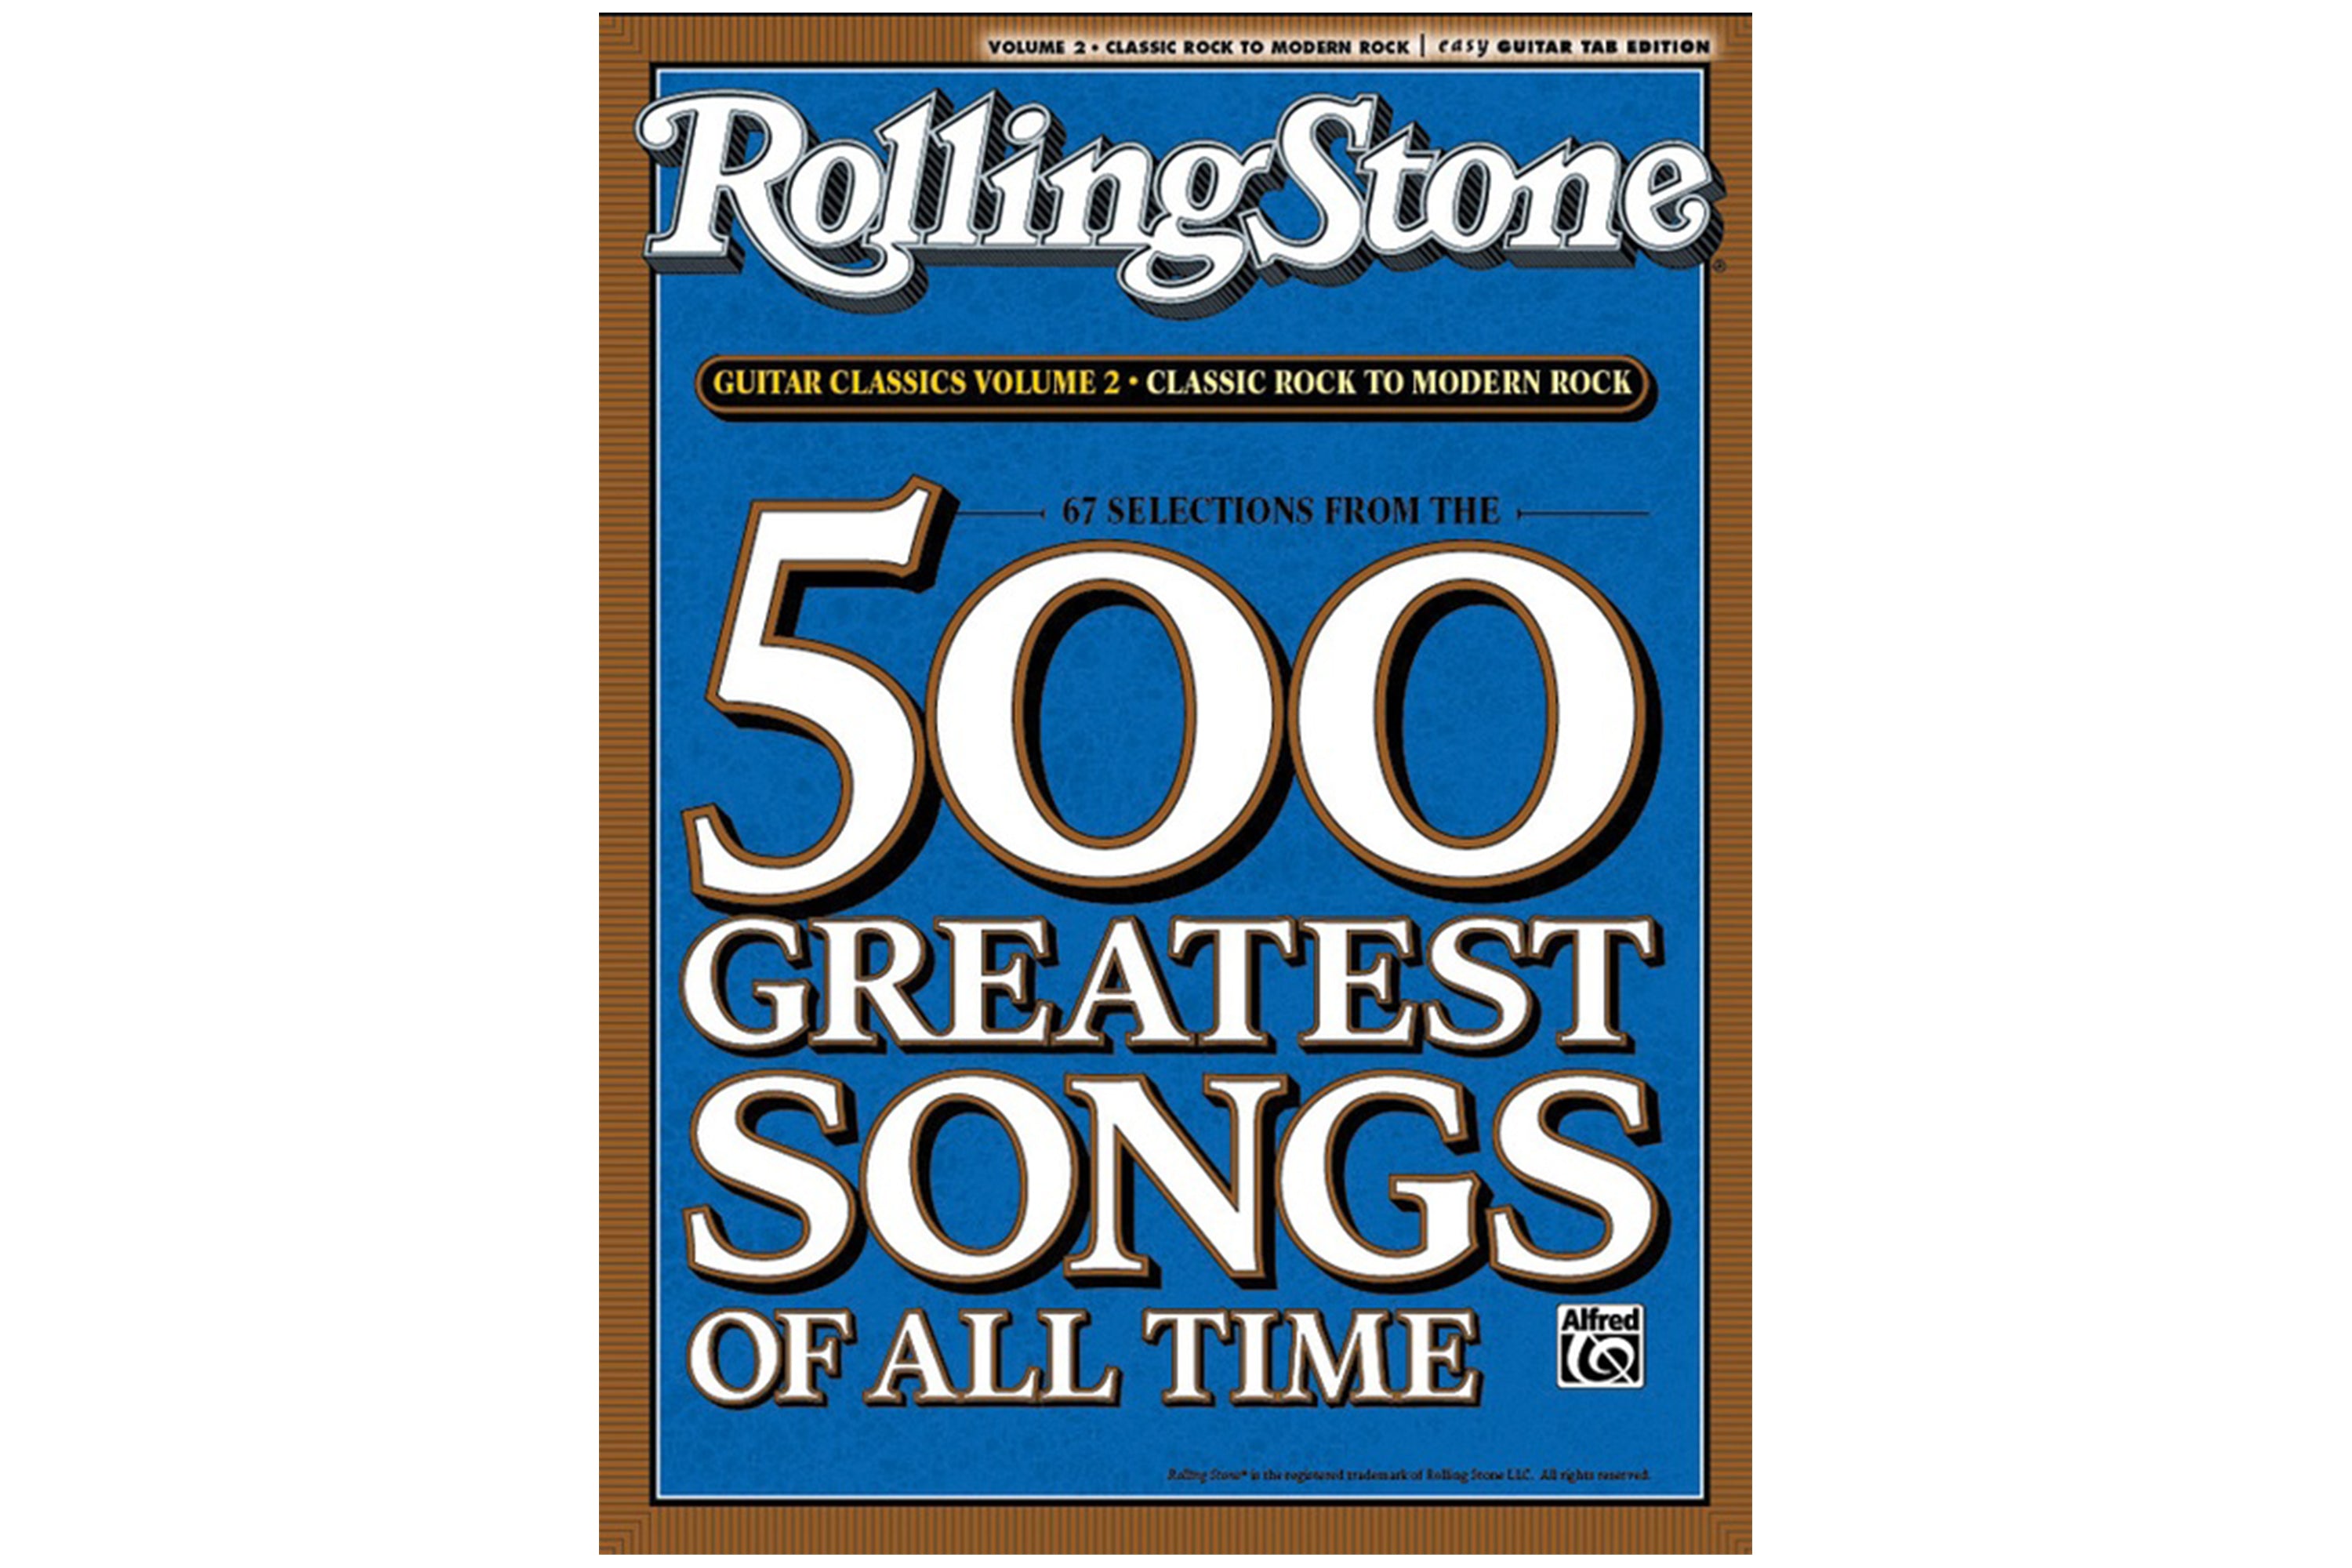 Alfred Selections from Rolling Stone Magazine's 500 Greatest Songs of All Time: Classic Rock to Modern Rock